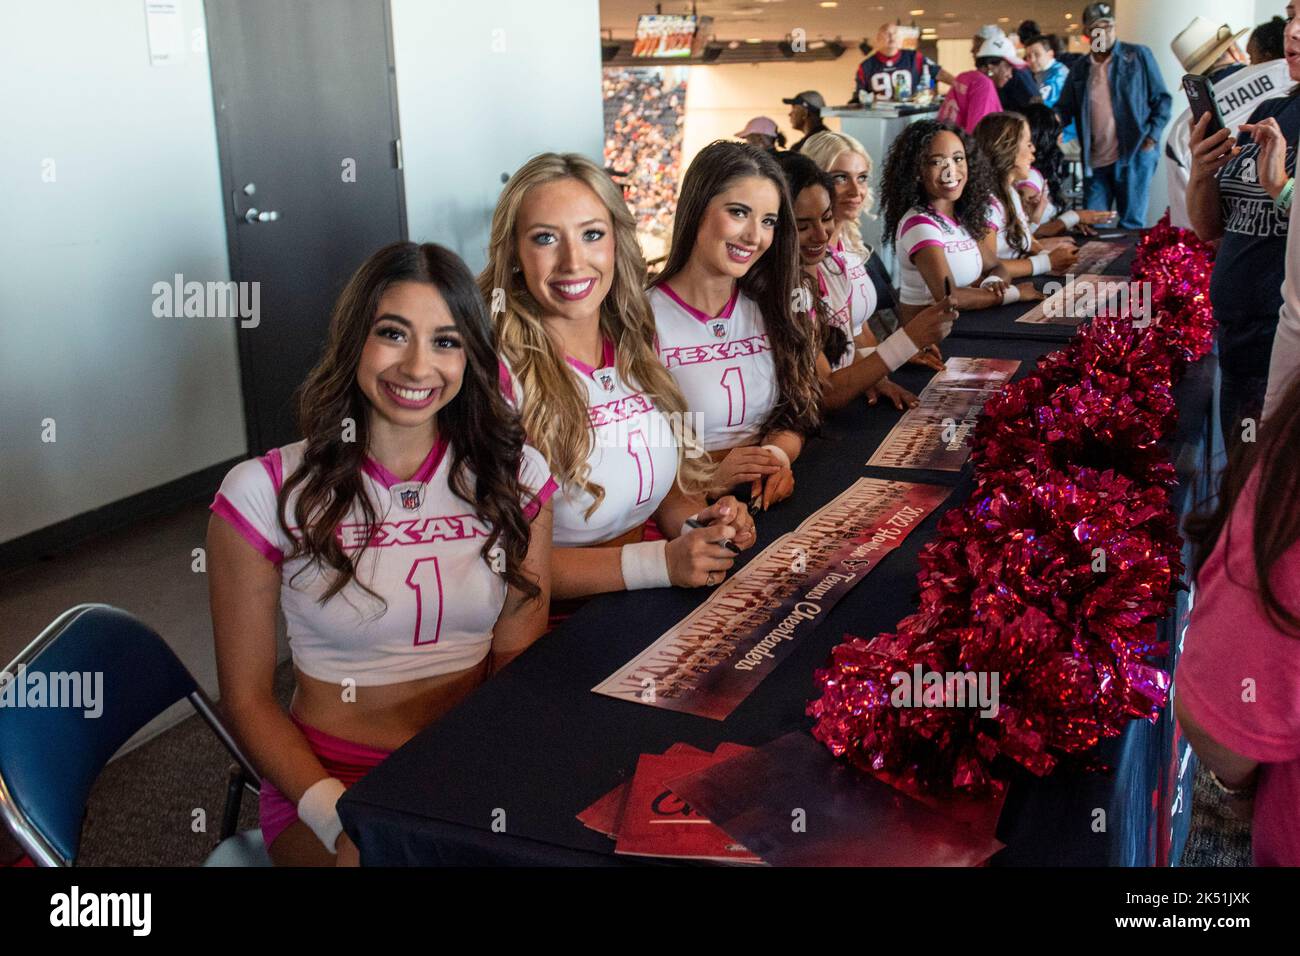 Houston Texans Cheerleaders sign autographs during half-time of the NFL Football Game between the Los Angeles Chargers and the Houston Texans on Sunda Stock Photo